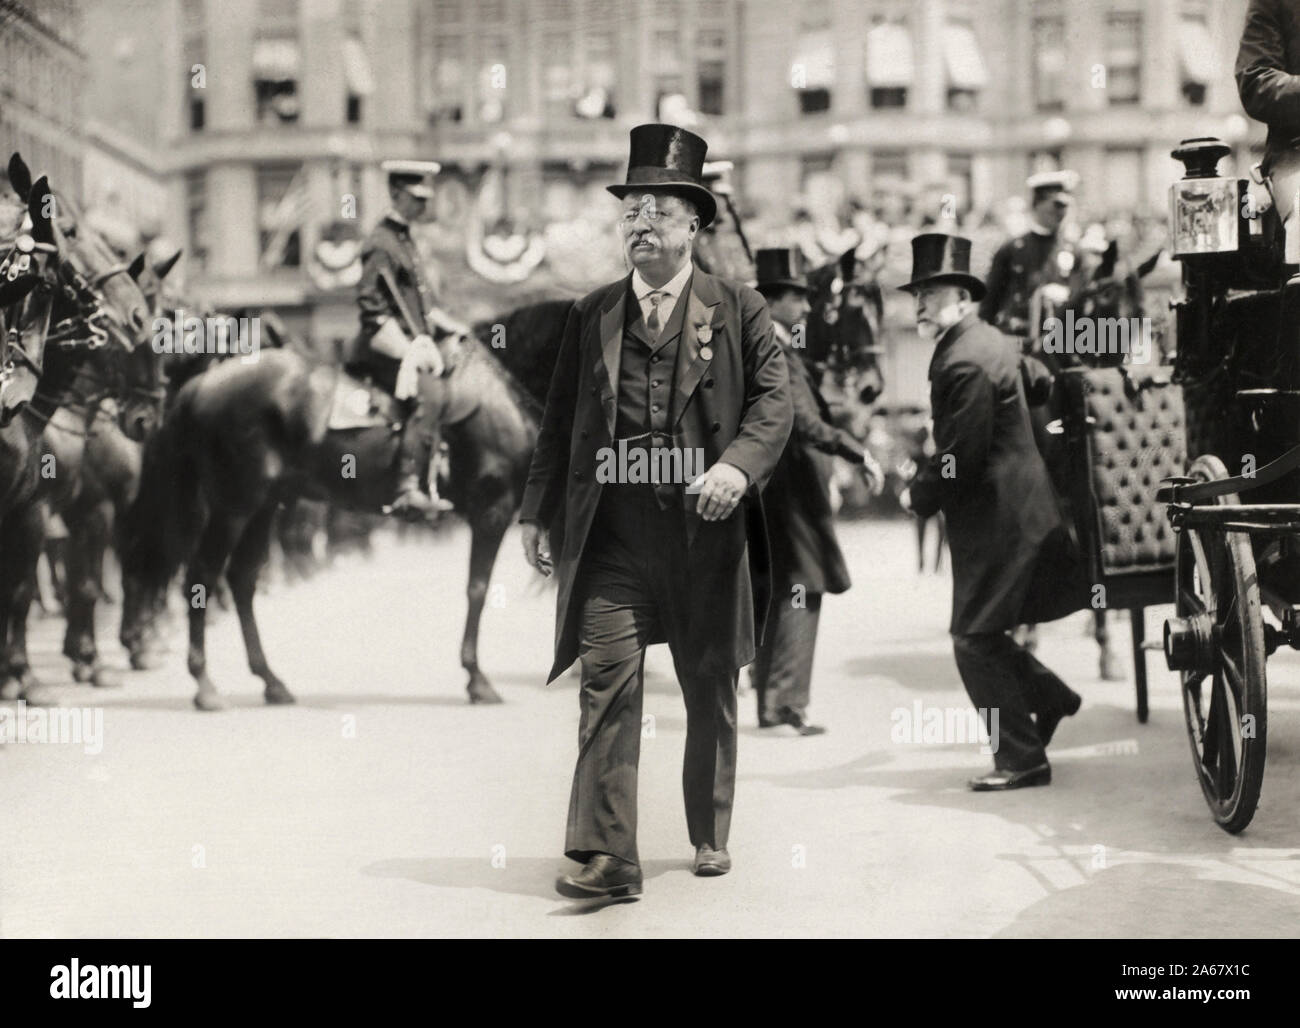 Theodore Roosevelt walking in Parade with New York City Mayor William Gaynor in background (right) during his Homecoming Reception after his trip Abroad, New York City, New York, USA, June 23, 1910 Stock Photo